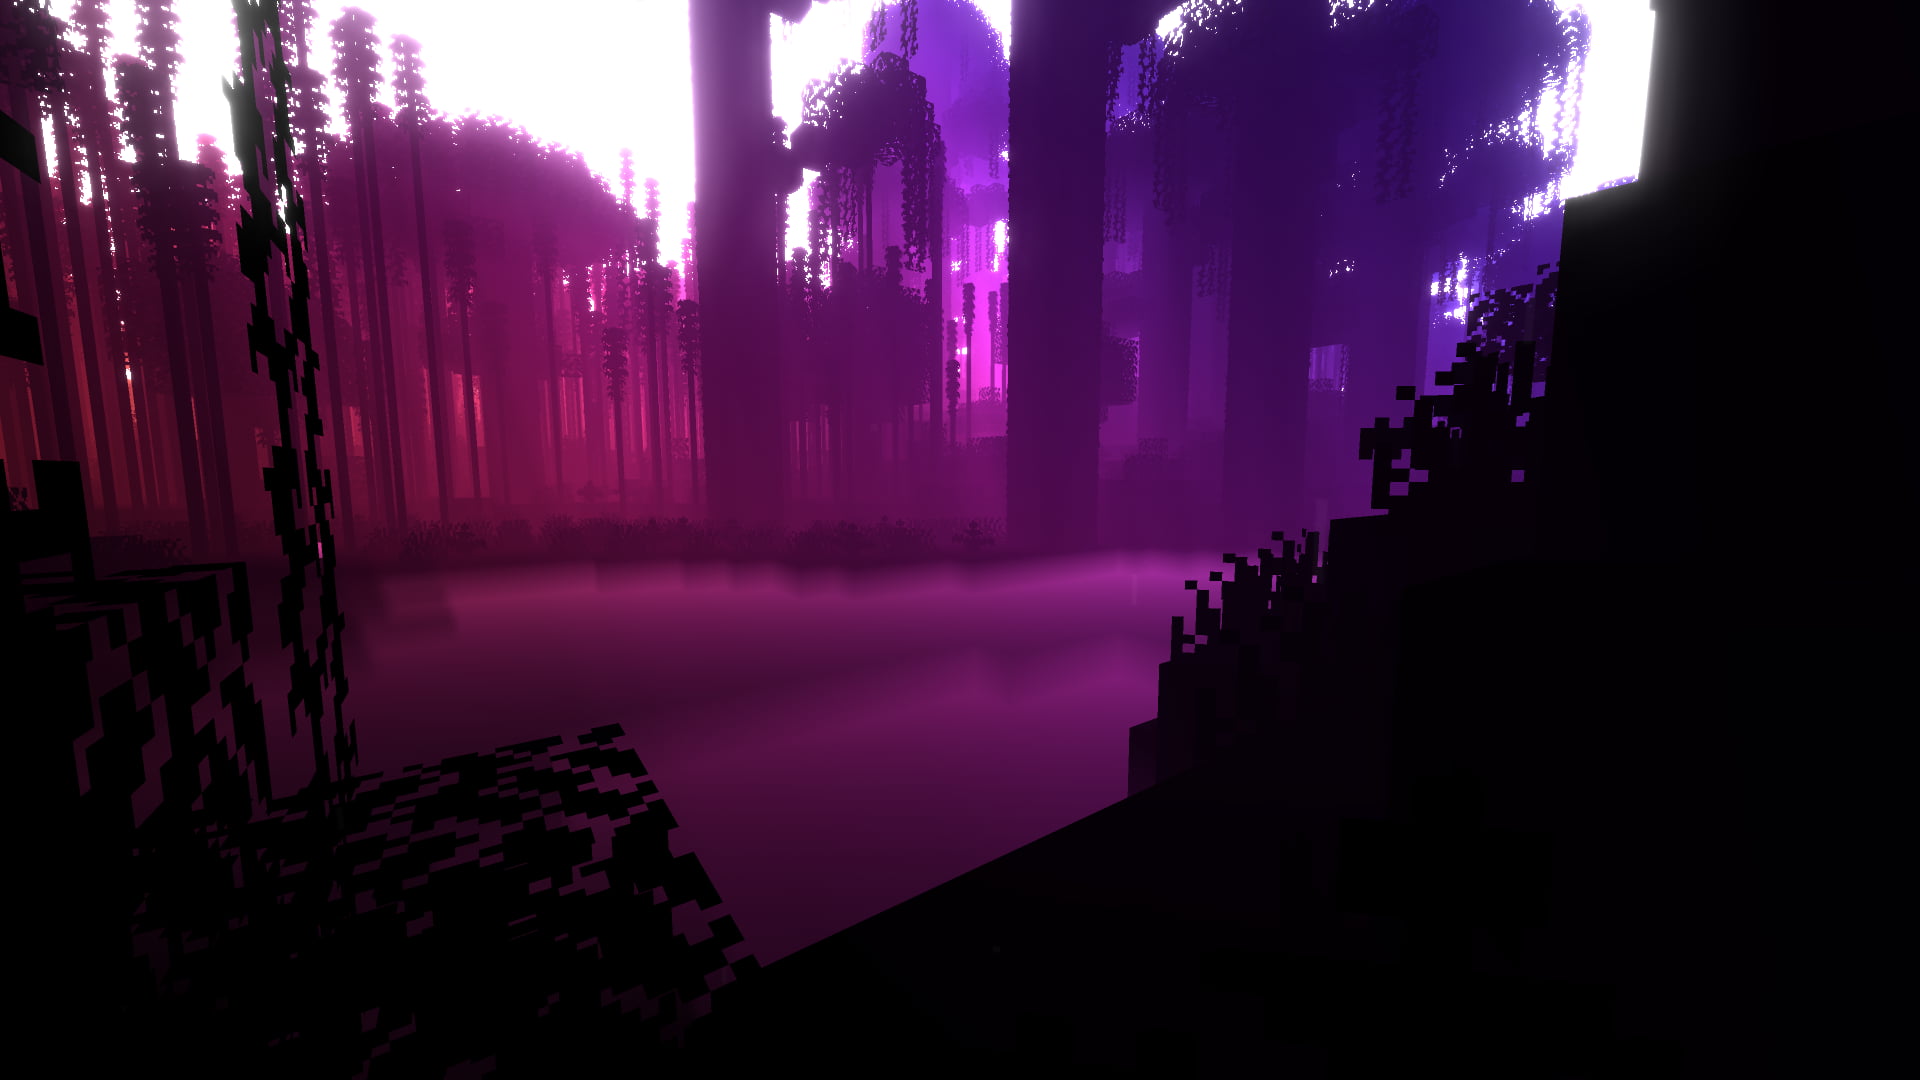 Wallpaper / 1080P, jungle, Minecraft nether, green, shaders, colorful, Minecraft, purple, blue free download